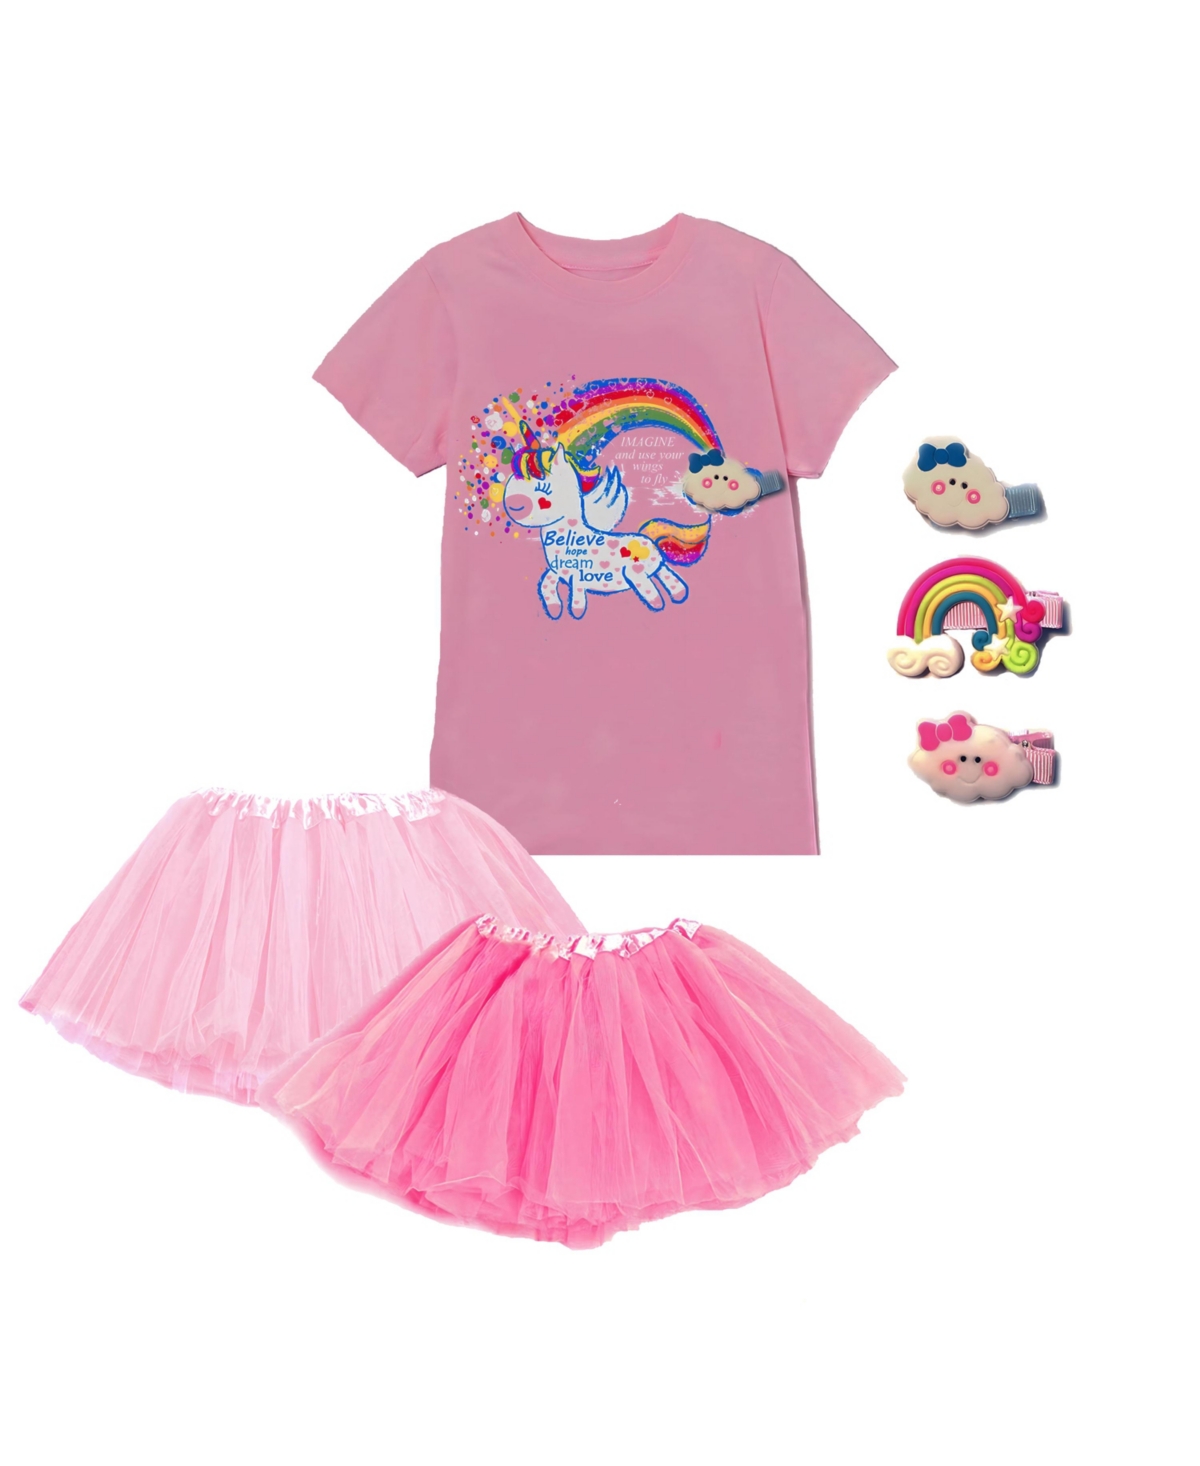 Mi Amore Gigi Toddler, Child Girls Unicorn Accessory Top And Skirt Set In Pink